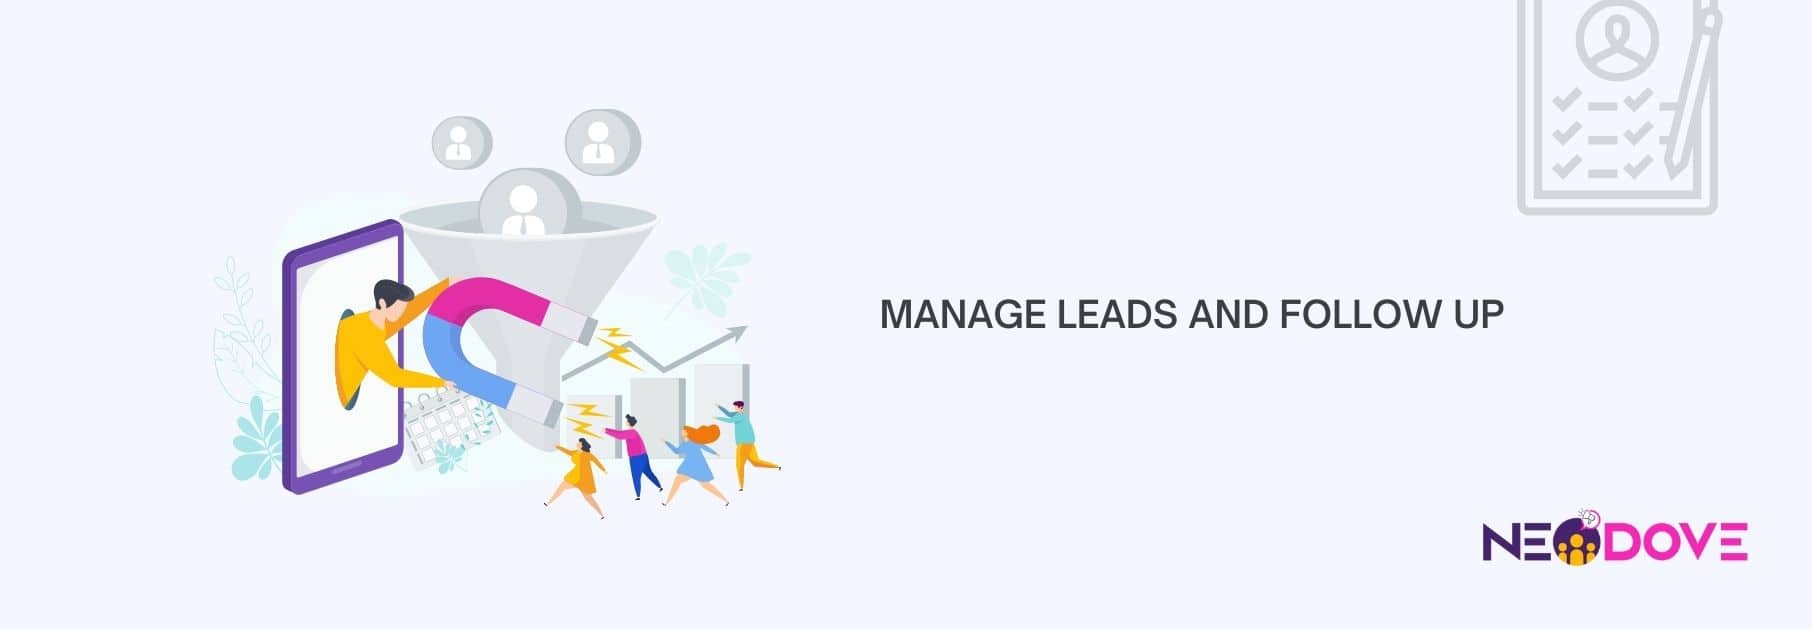 Manage leads